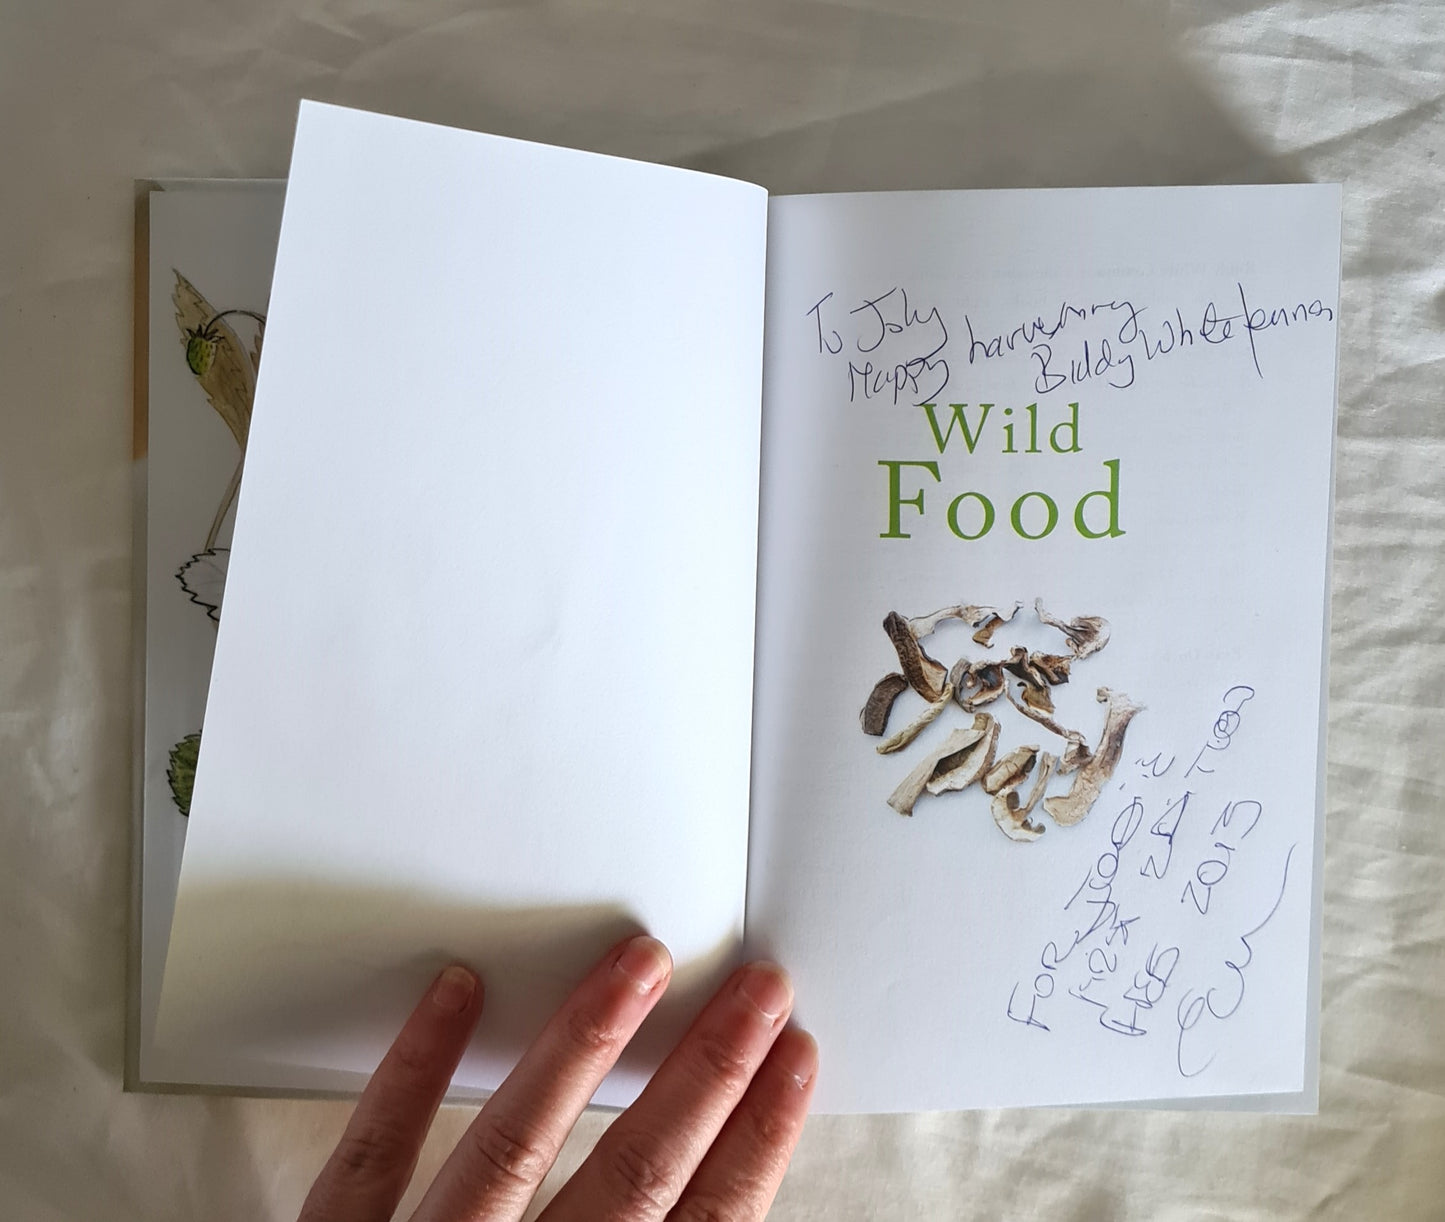 Wild Food by Biddy White Lennon and Evan Doyle